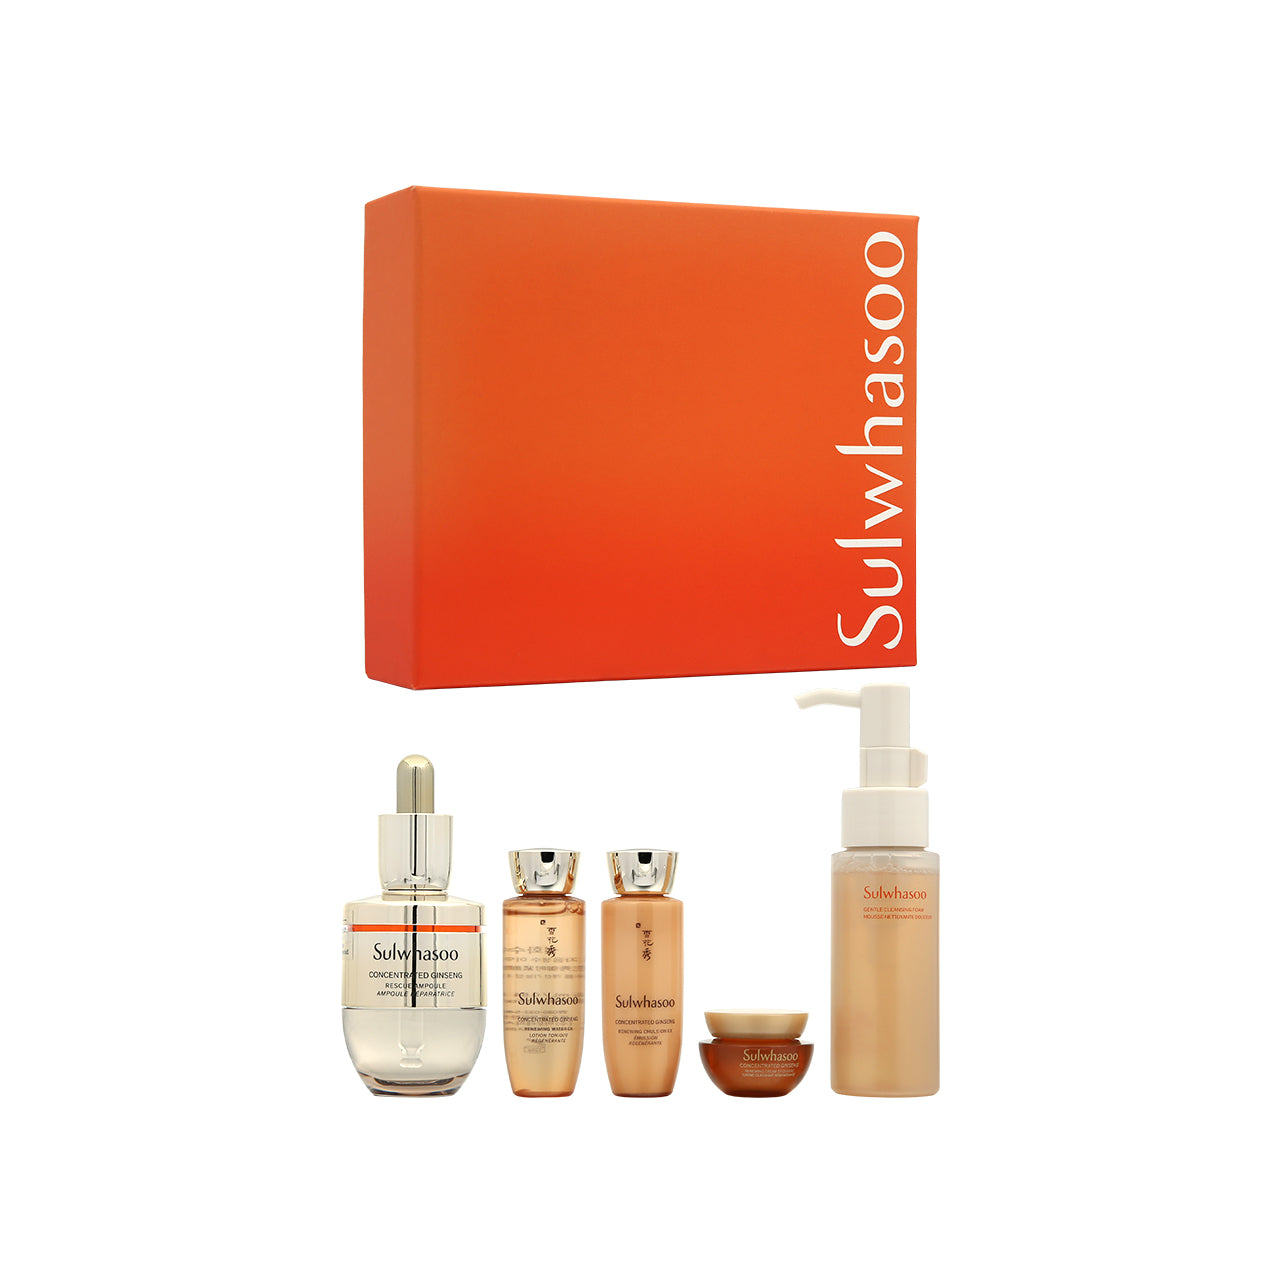 Sulwhasoo Concentrated Ginseng Ampoule Set 5pcs